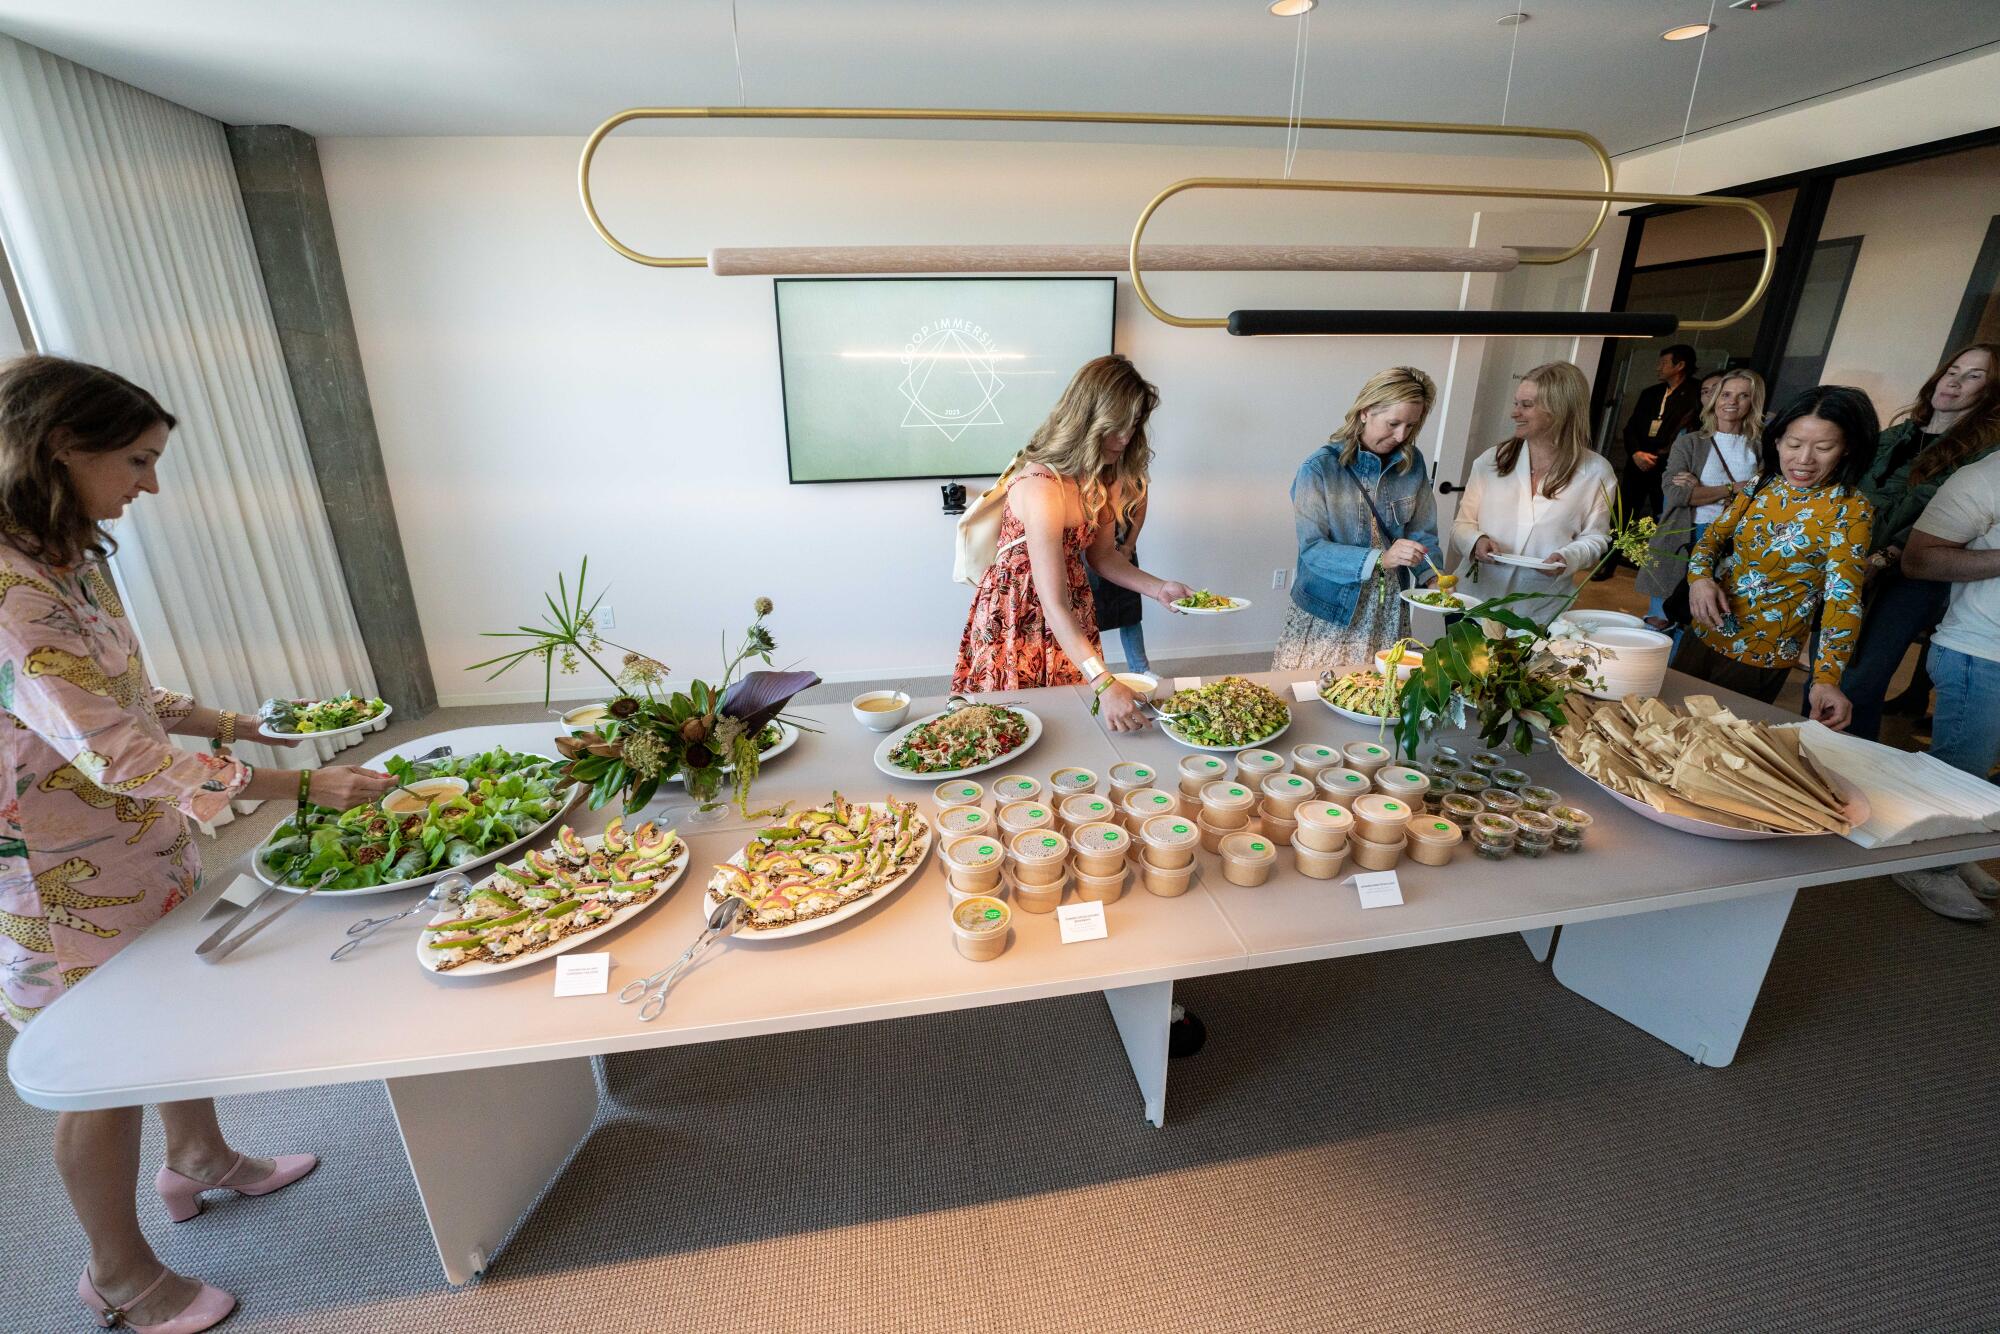 Salads and bone broth were served at the Goop event in Santa Monica.